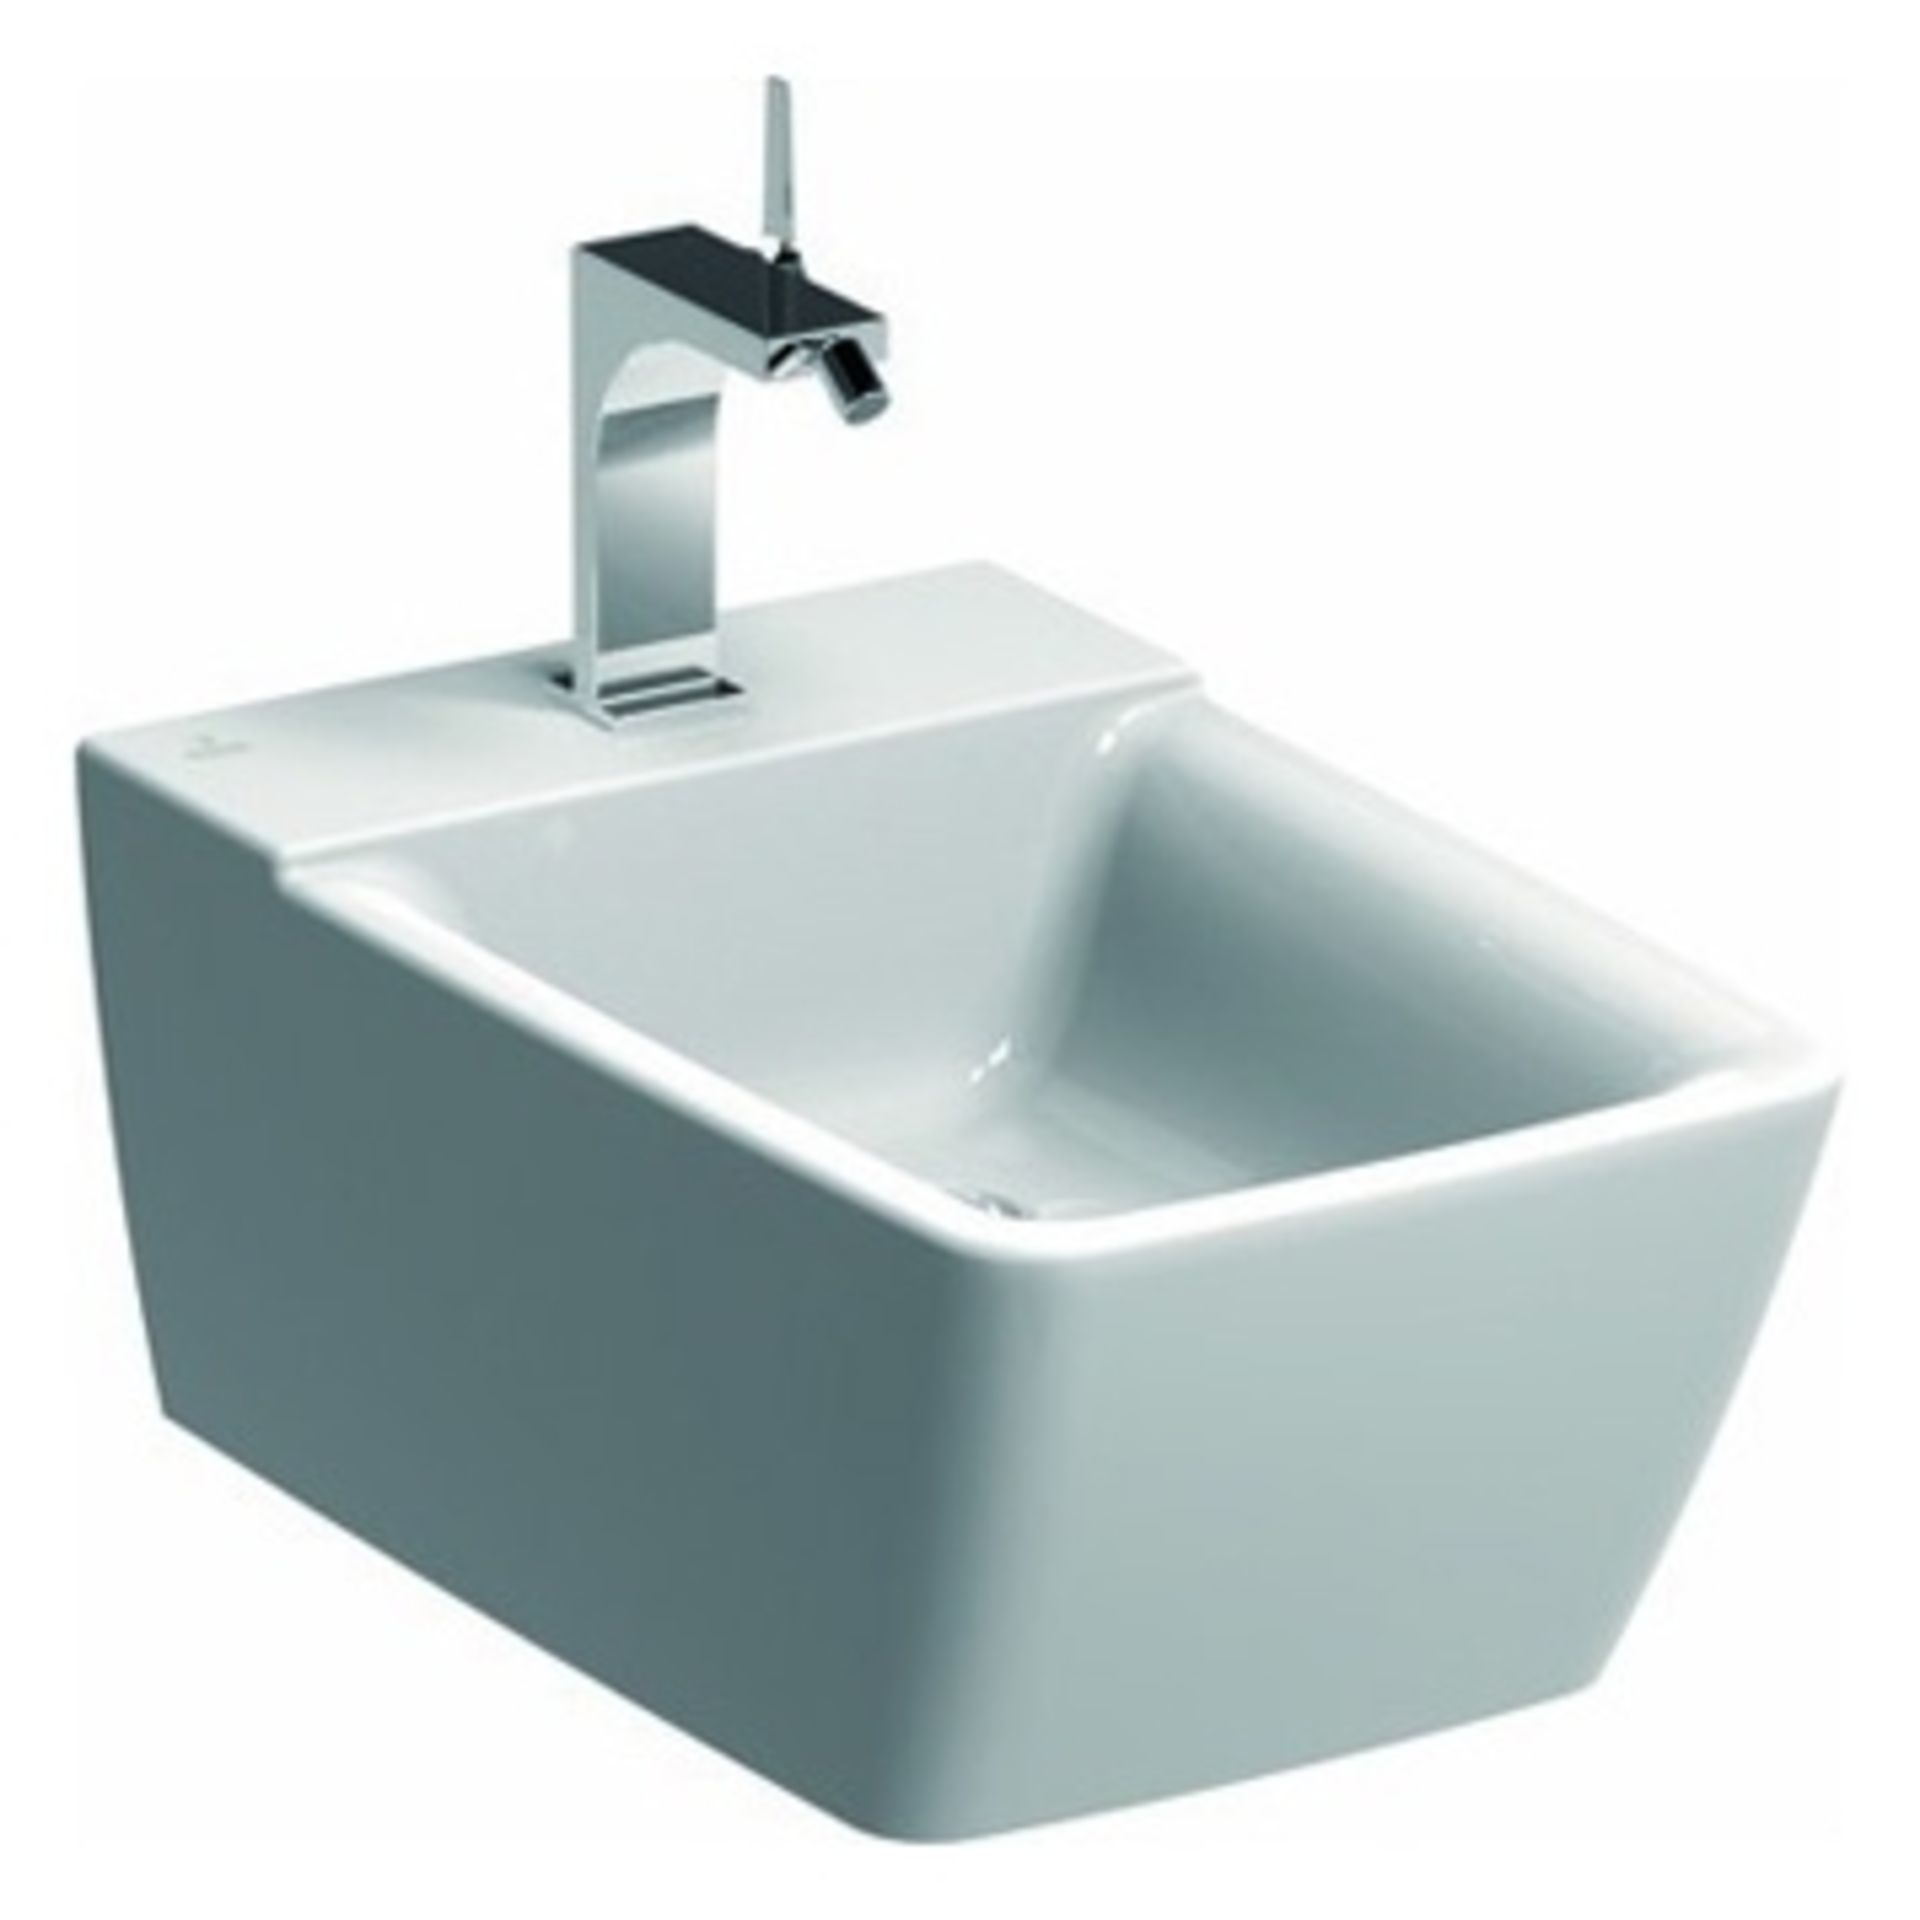 NEW (XL56) Xeno 540mm Bidet Wall Hung. RRP £389.99.A premium bathroom series of products wit... - Image 2 of 2